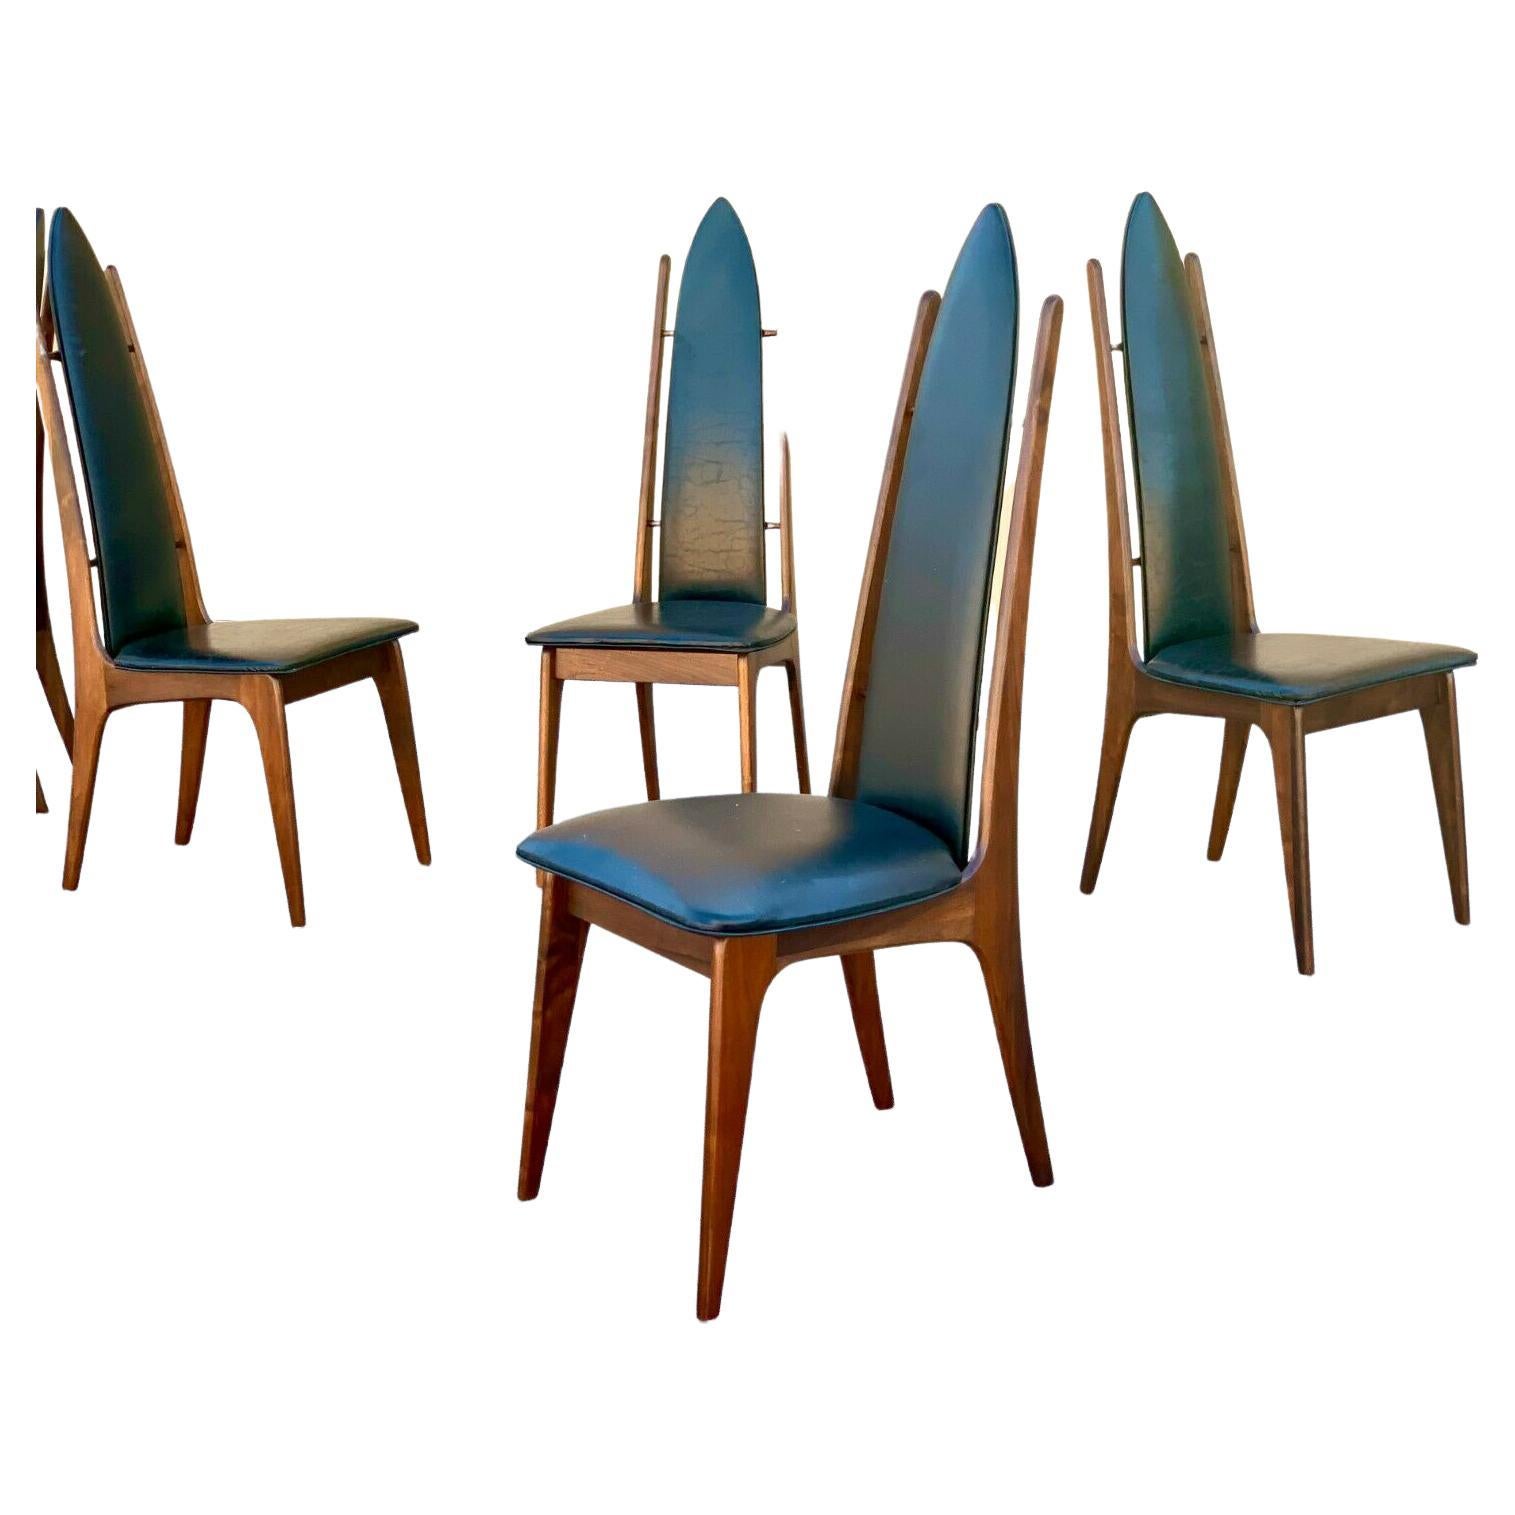 Set of 6 Mid Century high back dining chairs Attributed to Adrian Pearsall

Beautiful set of 6 midcentury dining chairs in Attributed to Adrian Pearsall. High arched backs along with splayed legs give these chairs an interesting visual profile.